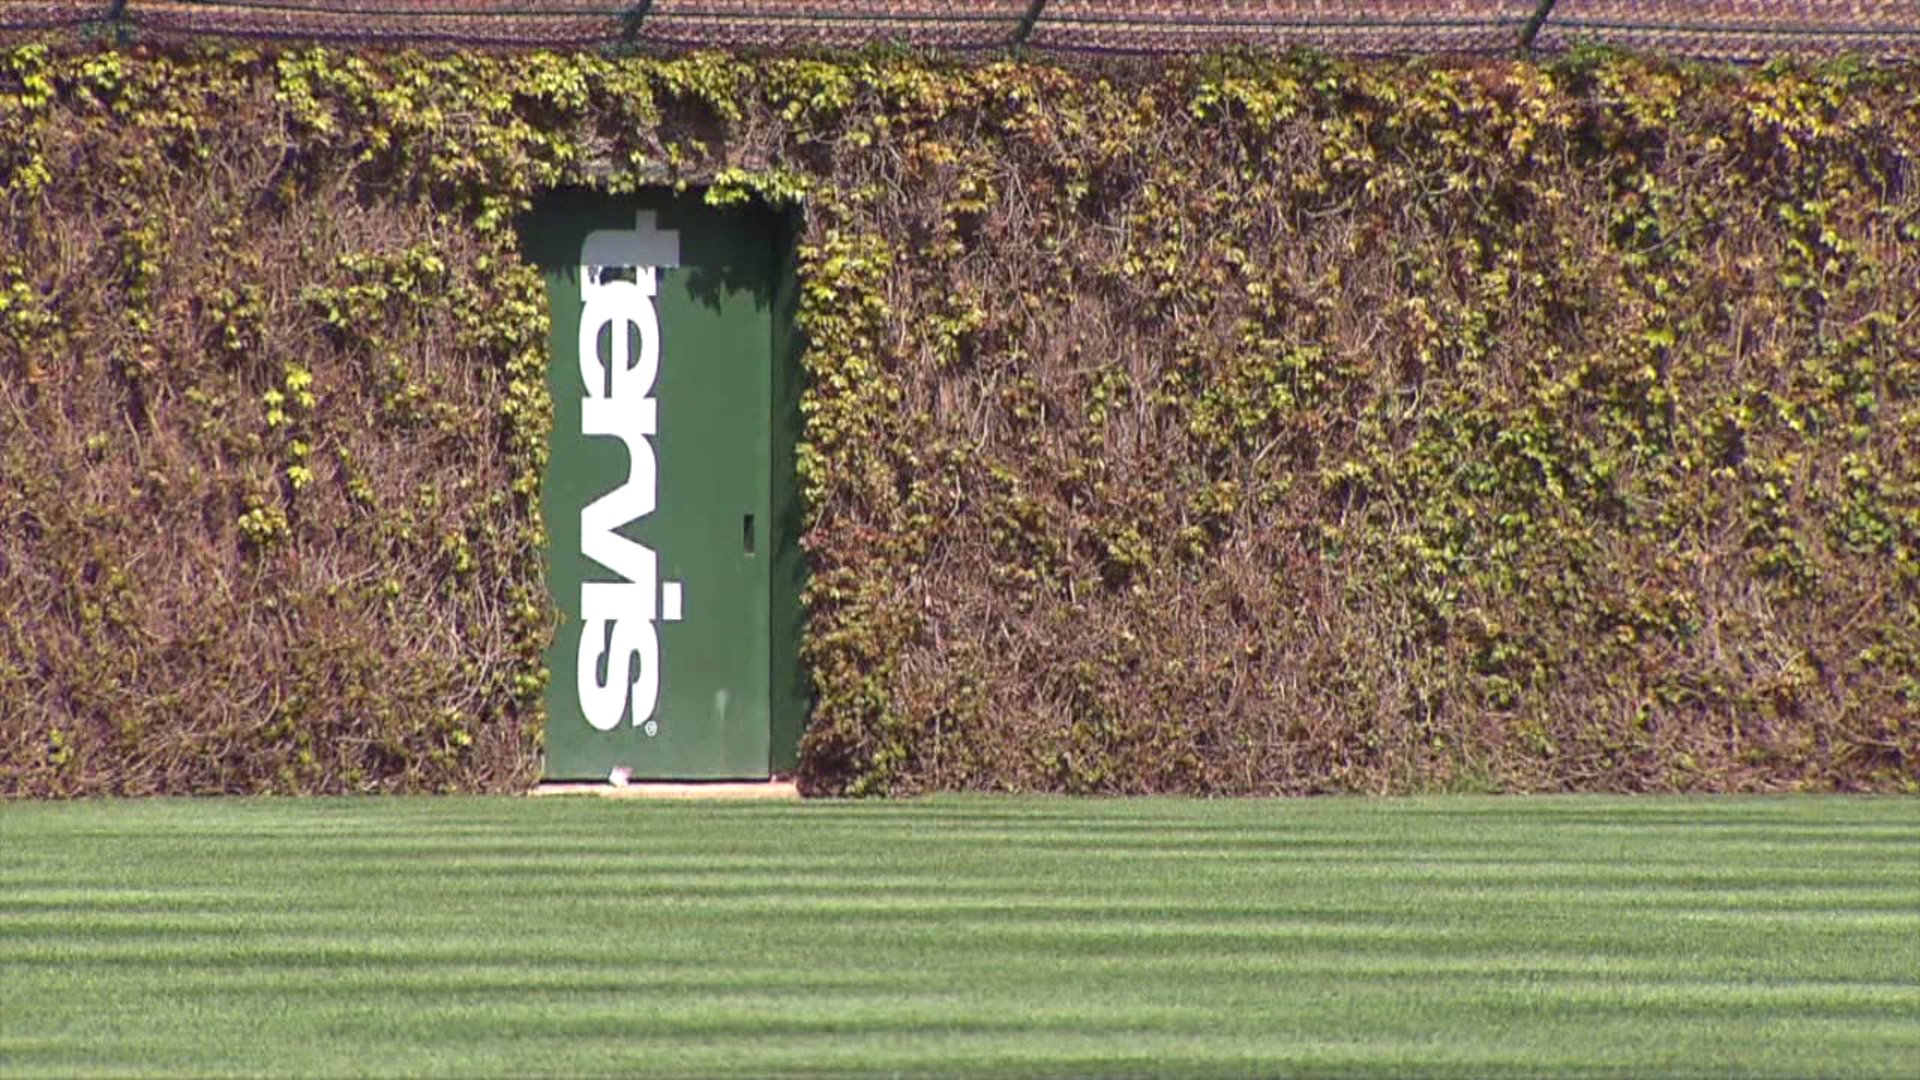 Did you know wrigley fields iconic ivy was inspired by the indianapolis indians fox